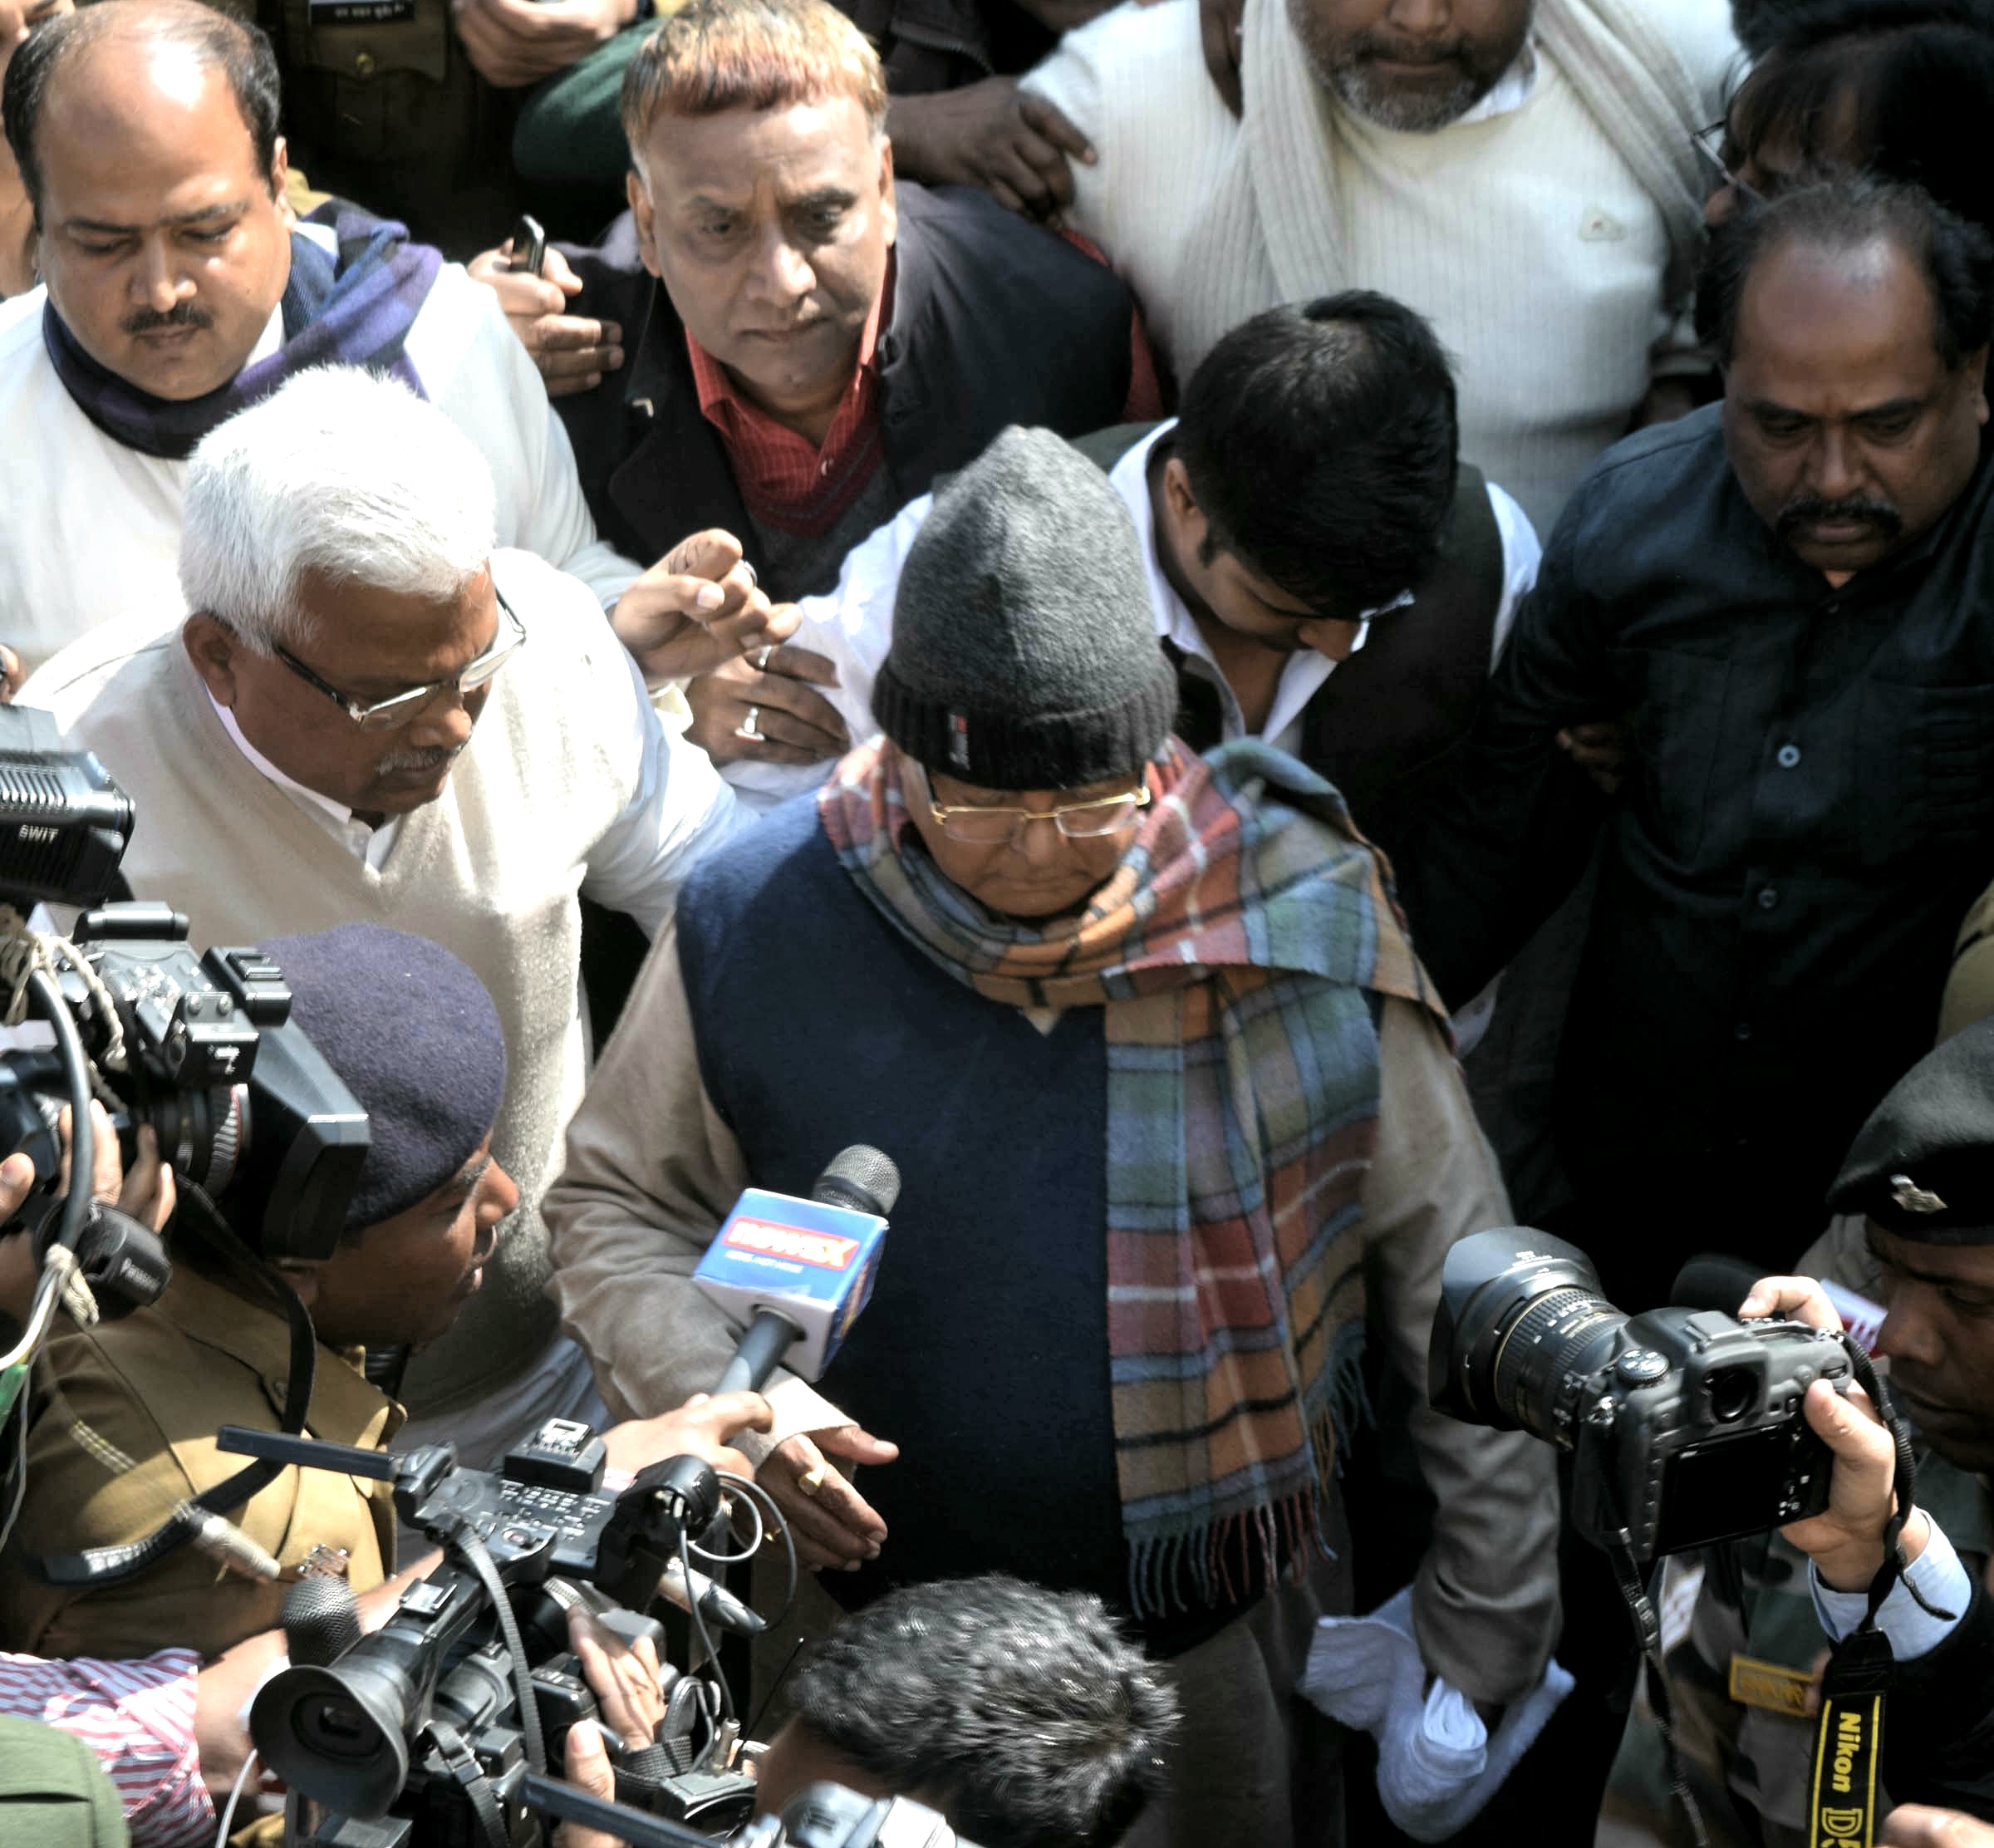 Bihar former Chief Minister and RJD Chief Lalu Prasad Yadav being produce at the Special CBI court